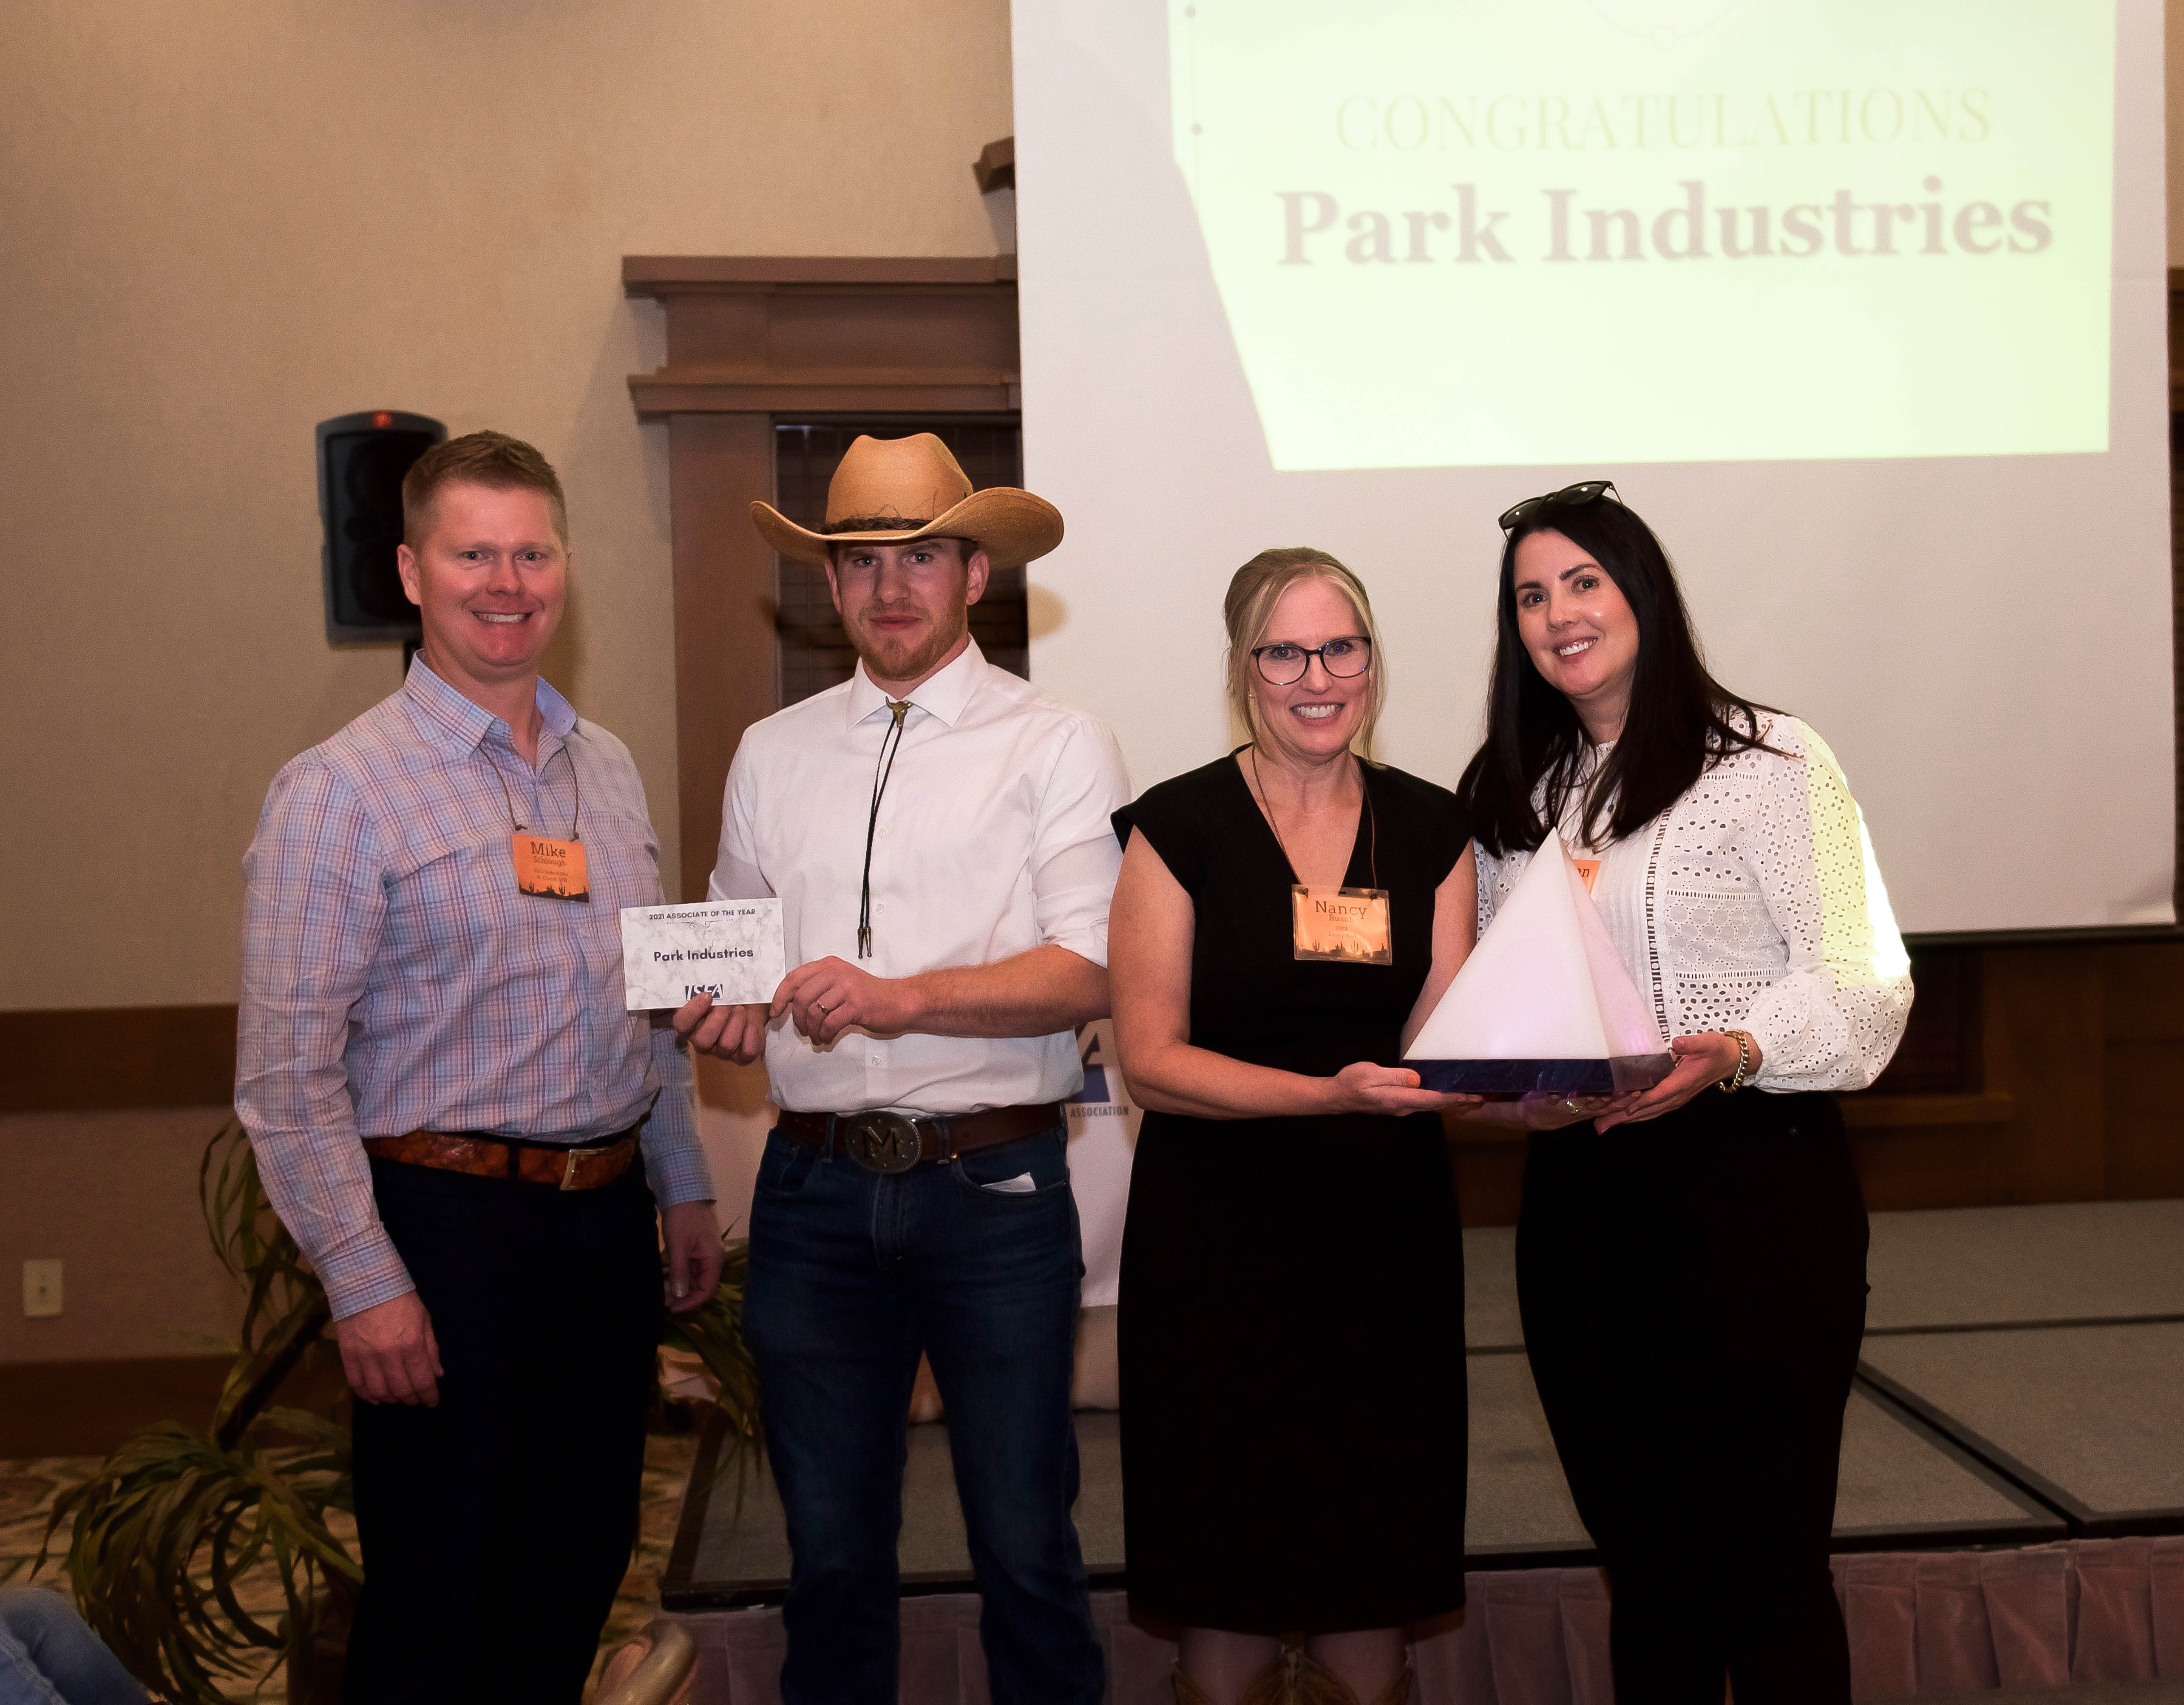 Meagan Hegland and Mike Schlough of Park Industries were presented with the 2021 Associate of the Year Award by Nancy Busch, executive director, and Travis McDermott, McDermott Top Shop.